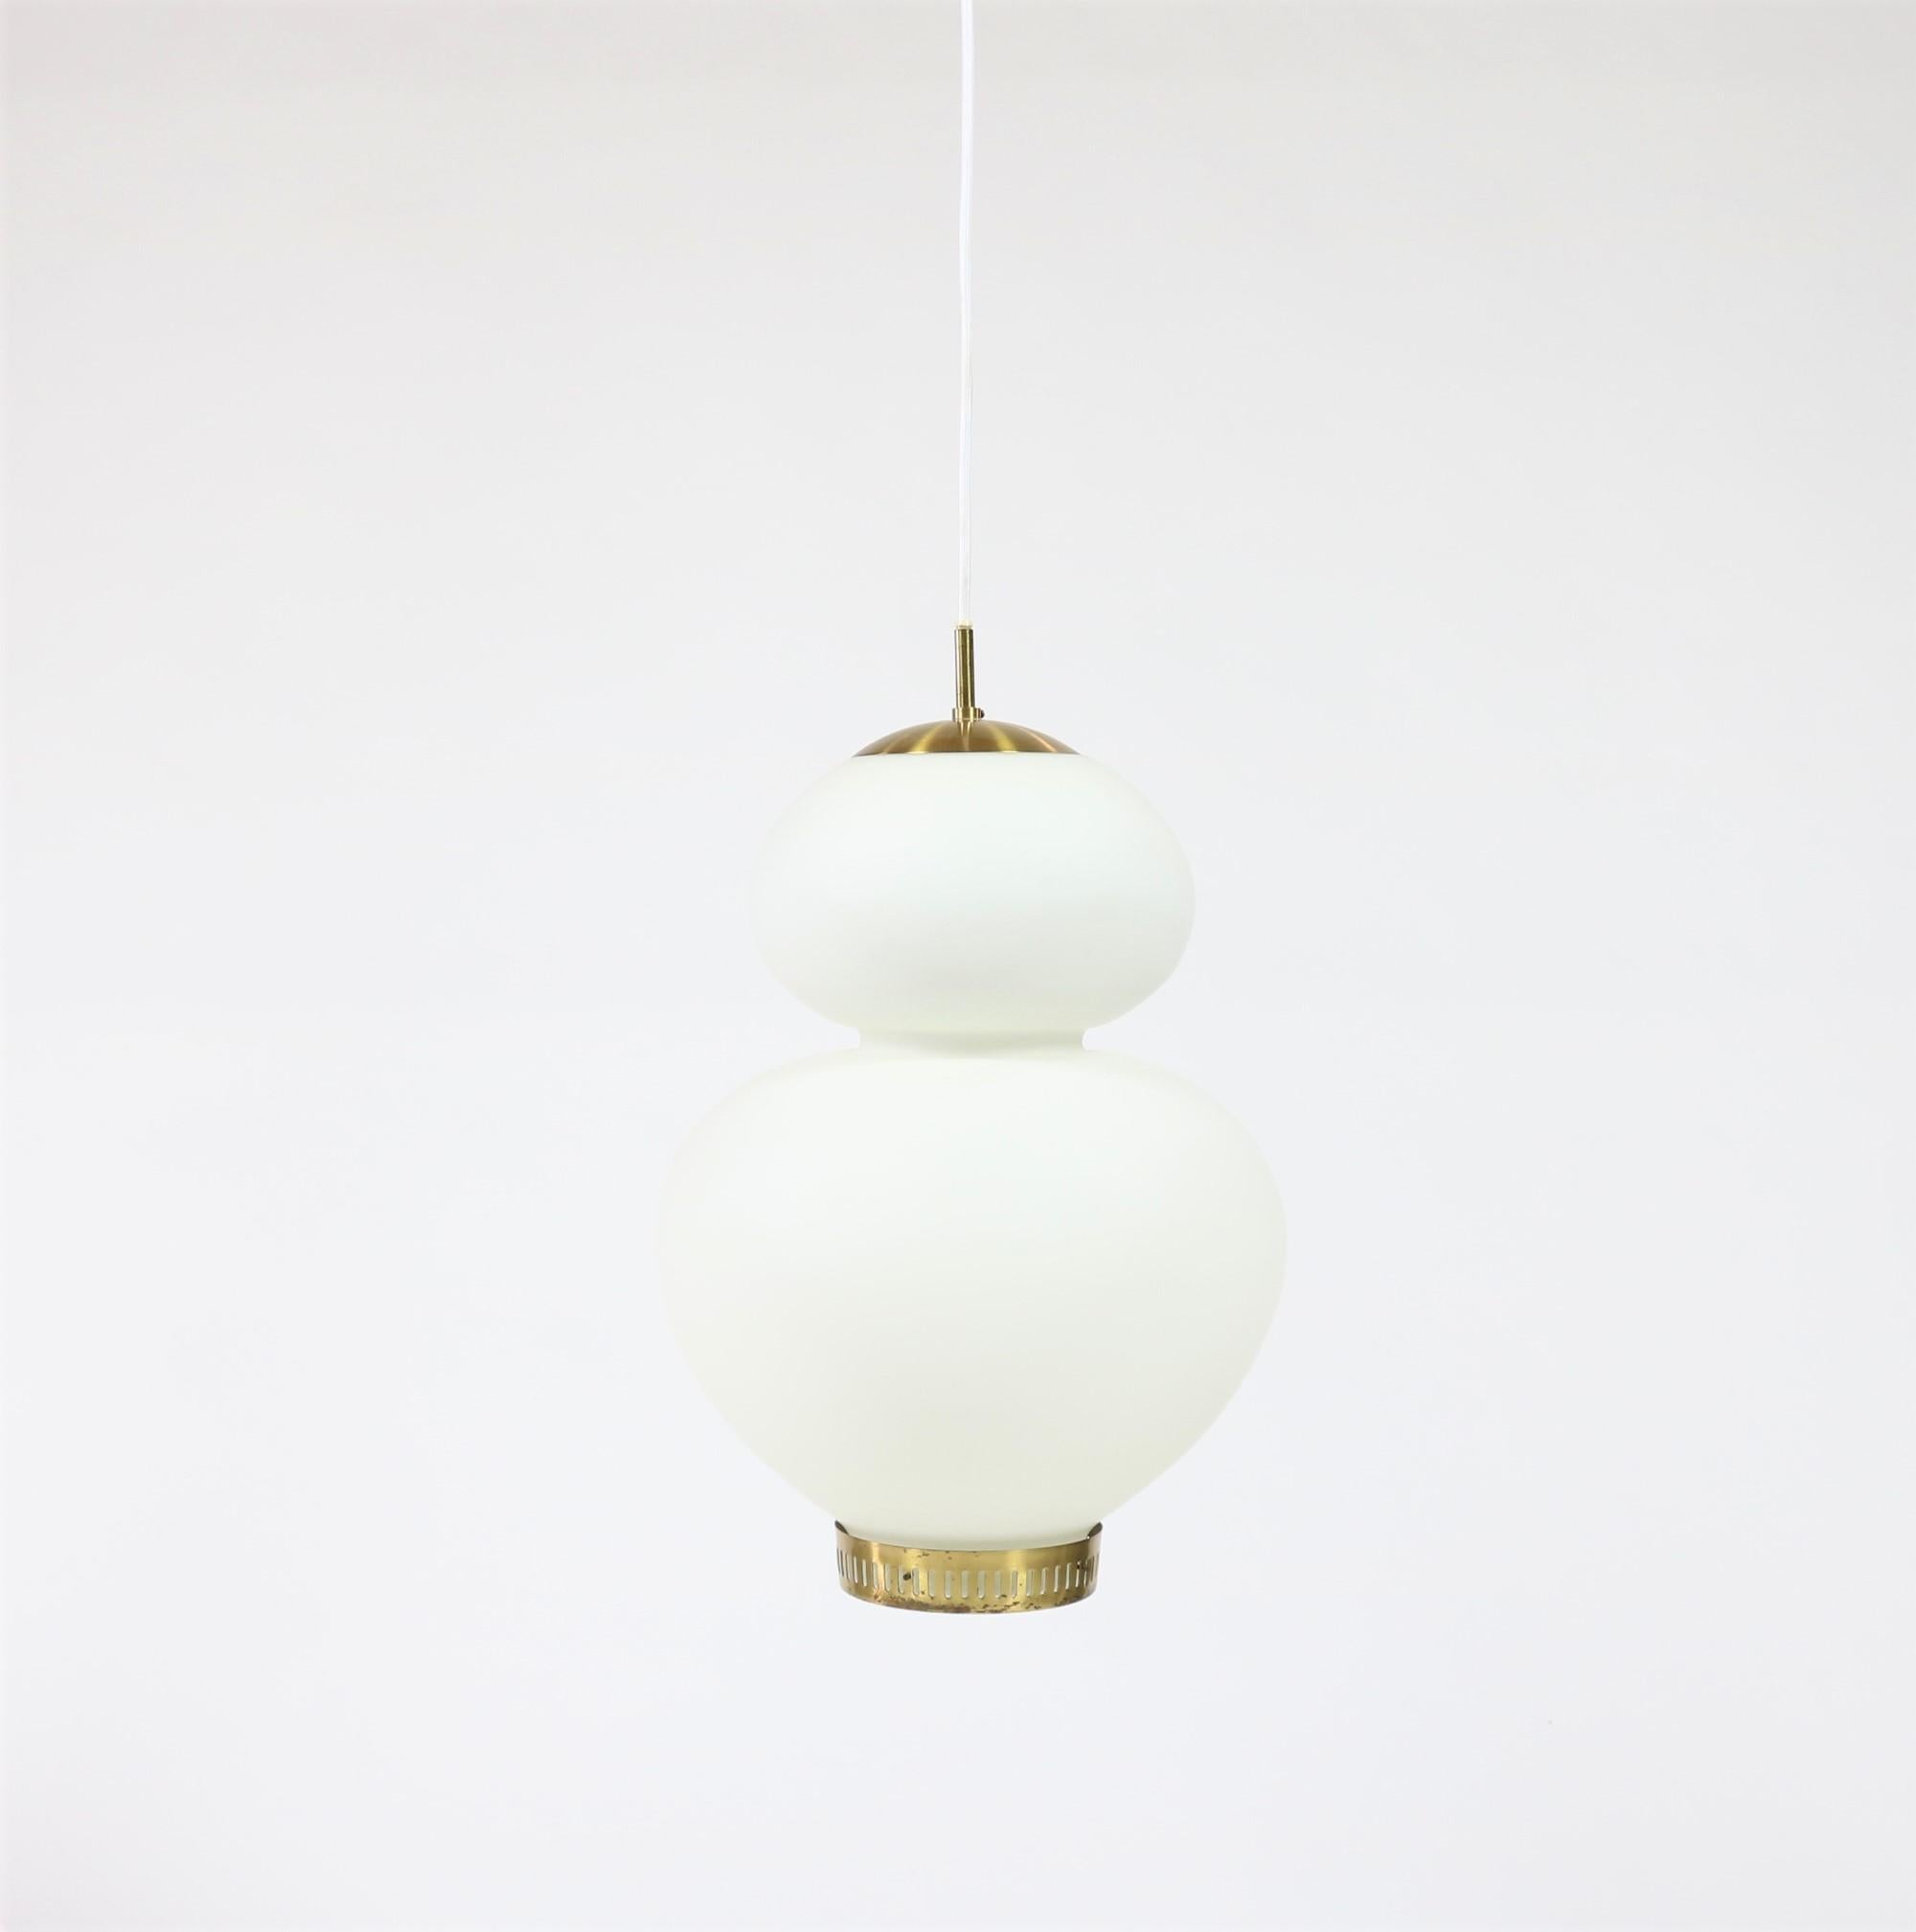 Beautiful pendant from the late 1940s by Danish designer Bent Karlby. Hand-blown opalized glass with an attractive curvy shape, complimented by a brass top and bottom. The brass bottom carries narrow peepholes, a Karlby trademark, and hold an opal